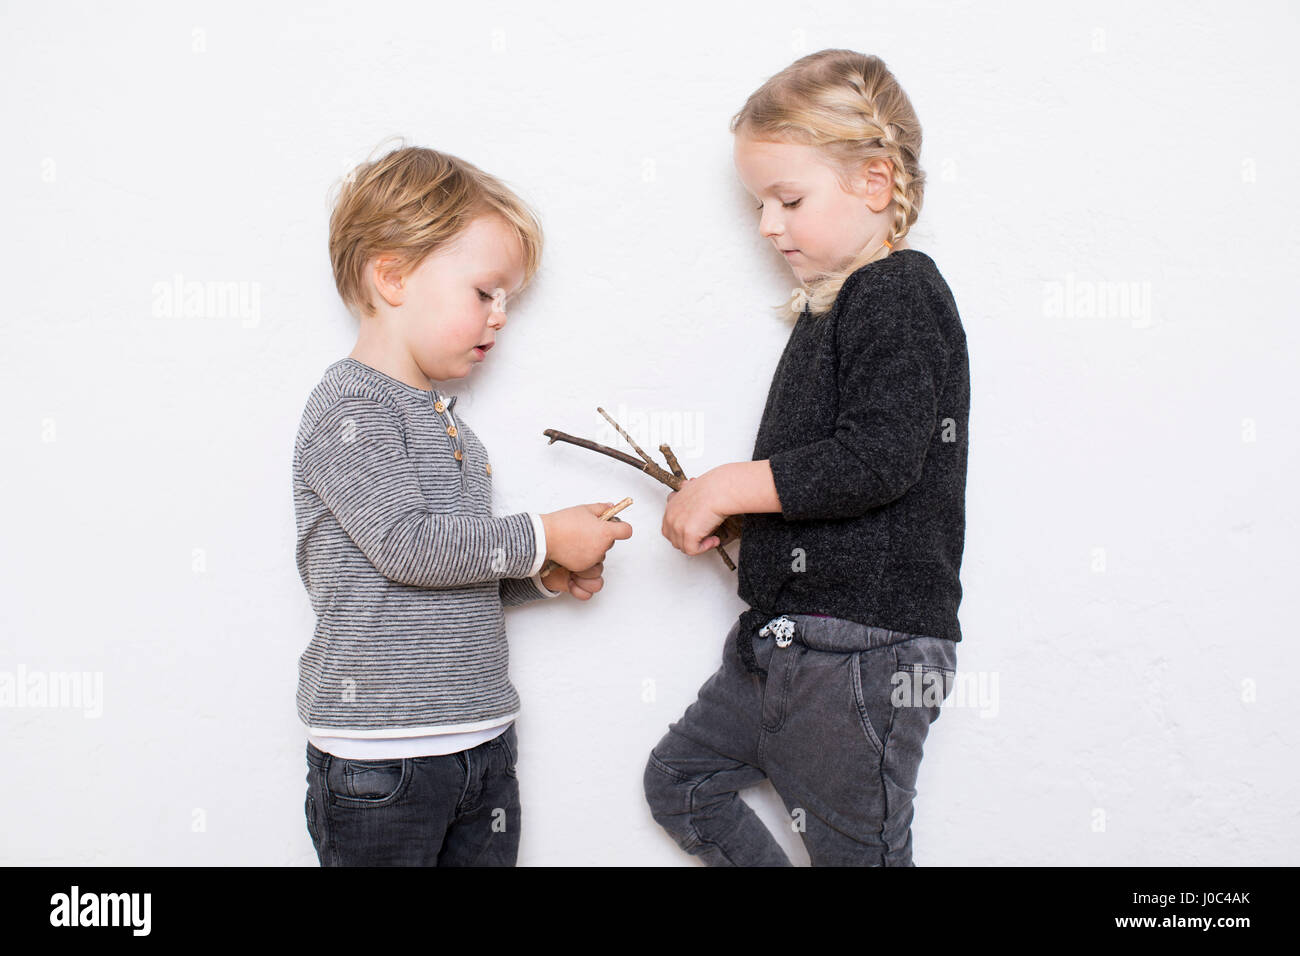 Young girl and boy leaning against white background, girl holding twigs Stock Photo